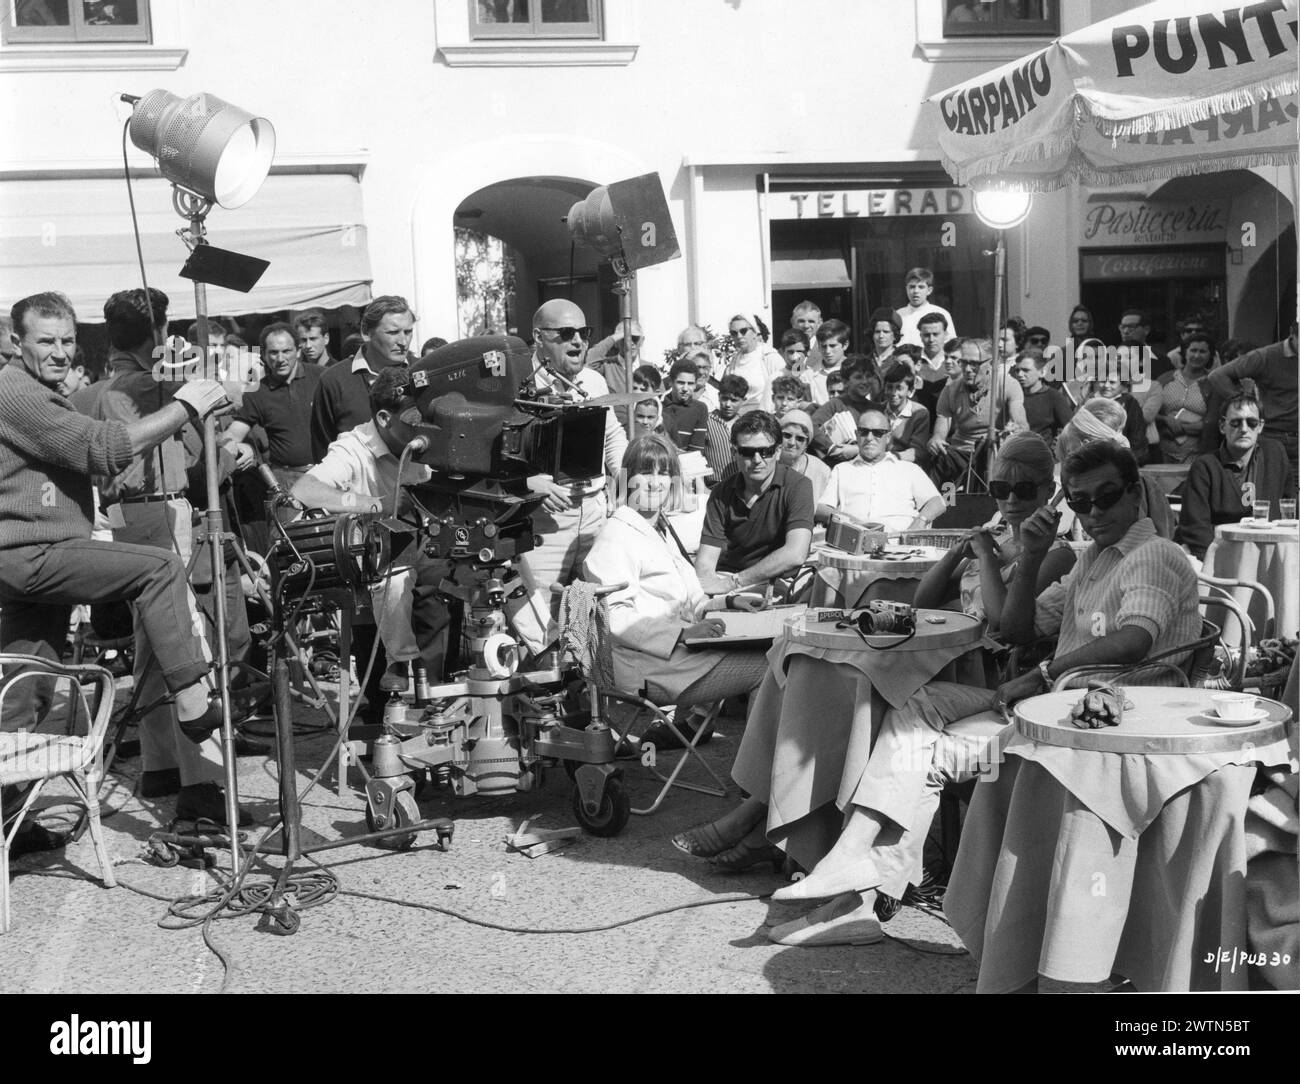 A candid photo of British Actress JULIE CHRISTIE and ROLAND CURRAM with JOHN SCHLESINGER and the camera crew filming a scene in Capri for DARLING 1965  Director JOHN SCHLESINGER  Screenplay FREDERIC RAPHAEL Costume Design JULIE HARRIS Music JOHN DANKWORTH Vic-Appia Films / Anglo Amalgamated Stock Photo